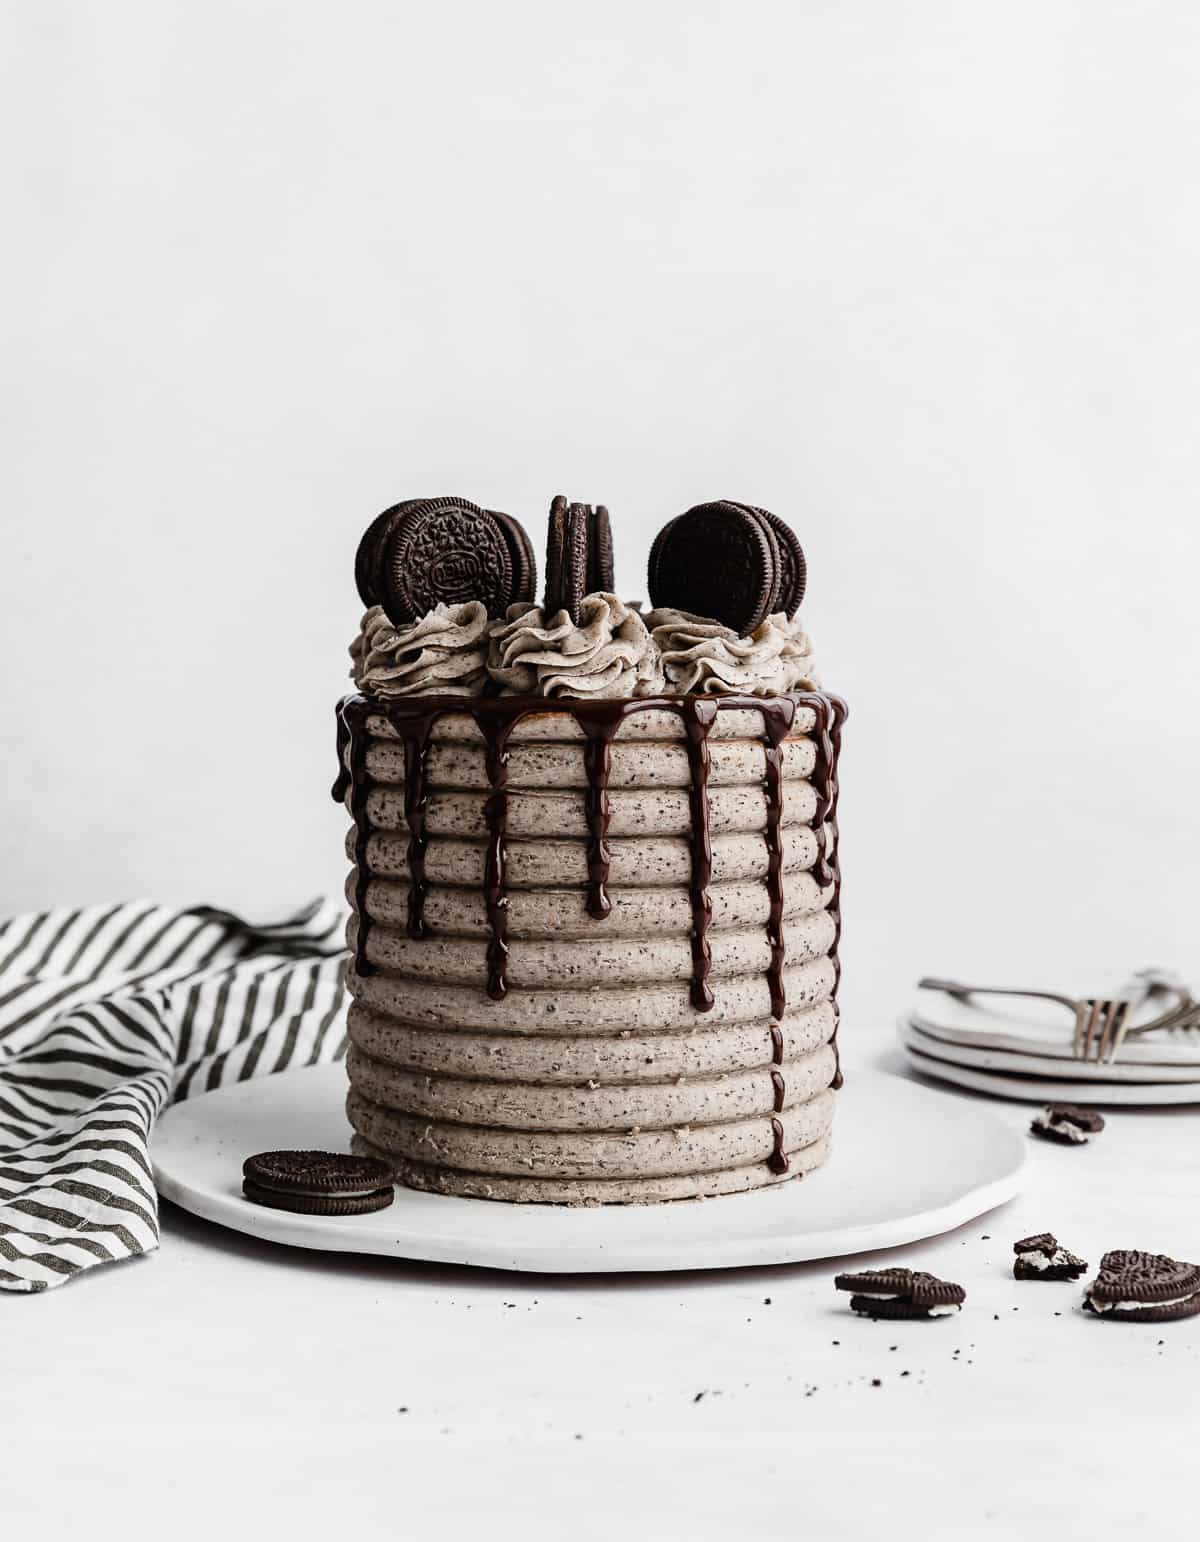 A Coconut Cookies and Cream Cake with a chocolate drip and Oreos on the top.